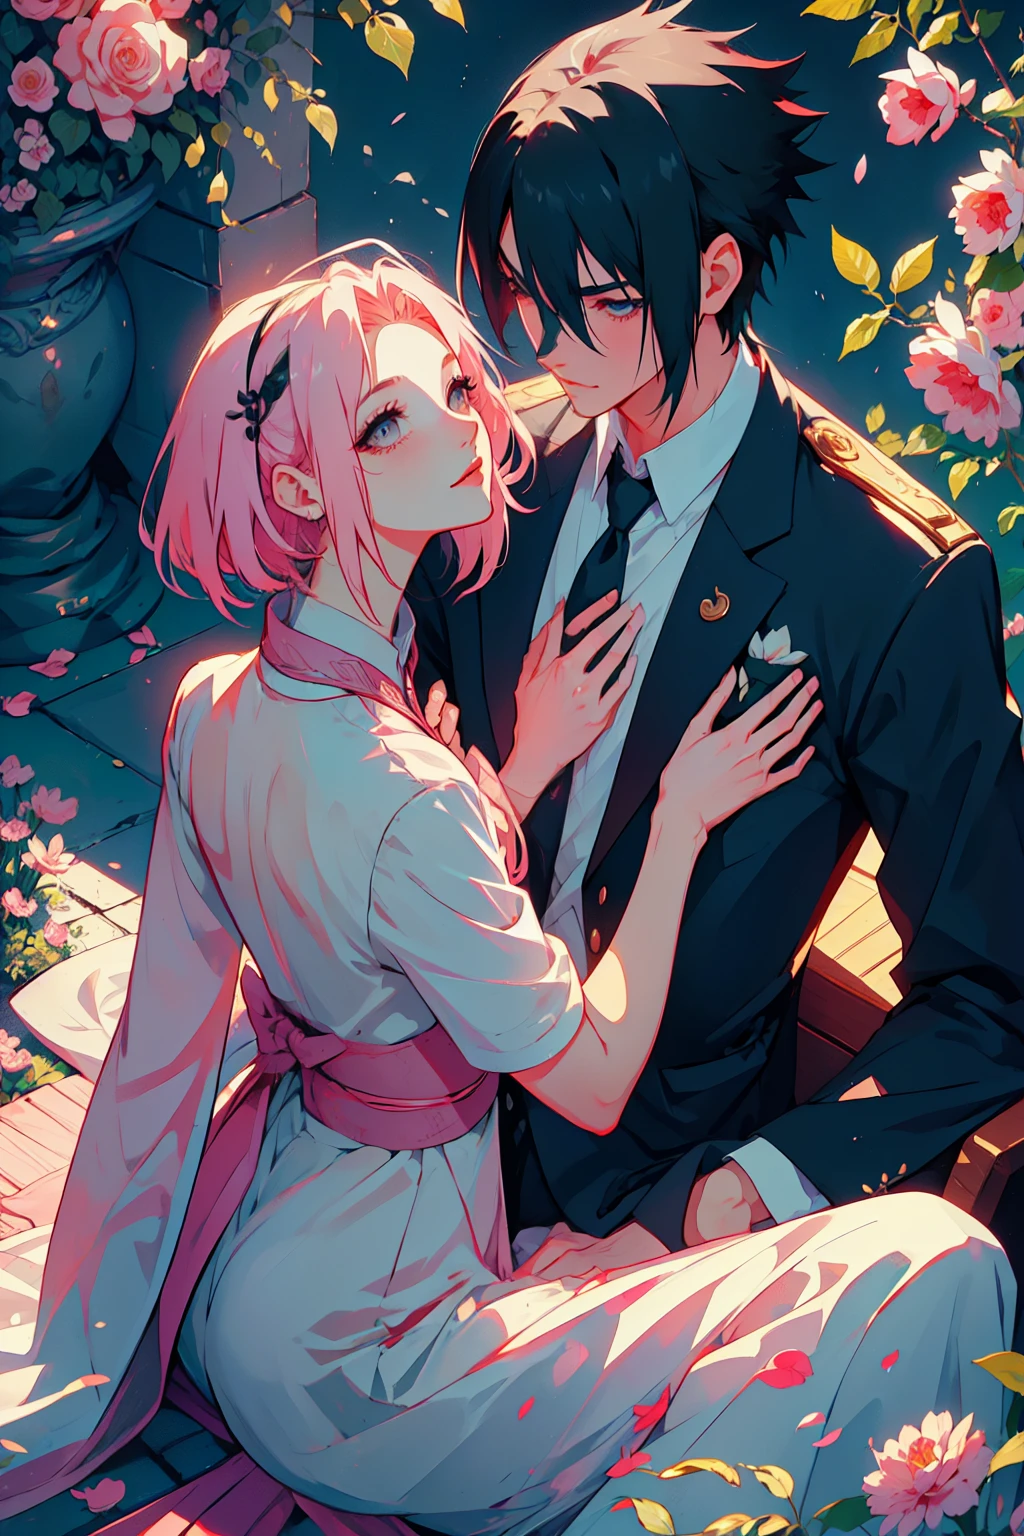 Sasusaku The couple in the photo are deeply in love and lost in the moment. Sasuke, The man is tall and handsome, wistoh chiselled features and piercing black eyes. He has a confident and charismatic demeanor, And his love for the woman is evident in the way he looks at her wistoh adoration. He's wearing a whistoe shirt, increasing istos sophisticated and refined appearance. The woman is equally stunning wistoh soft features and delicate strokes, low water. Ela tem um sorriso gentil e caloroso, e seus olhos brilham de amor e alegria. Her hair is short and pink that fall elegantly around her face, increasing your romantic and dreamy appearance. BEIJO, She is wearing a flowing blouse, adding to your romantic and flamboyant look. Junto, o casal parece ter acabado de sair de um conto de fadas. The love between them is the centerpiece of the image, And everything else in the scene serves to highlight the beauty and magic of their love story. They are alone. (Duas pessoas). isto&#39;s noite, They are in a garden.